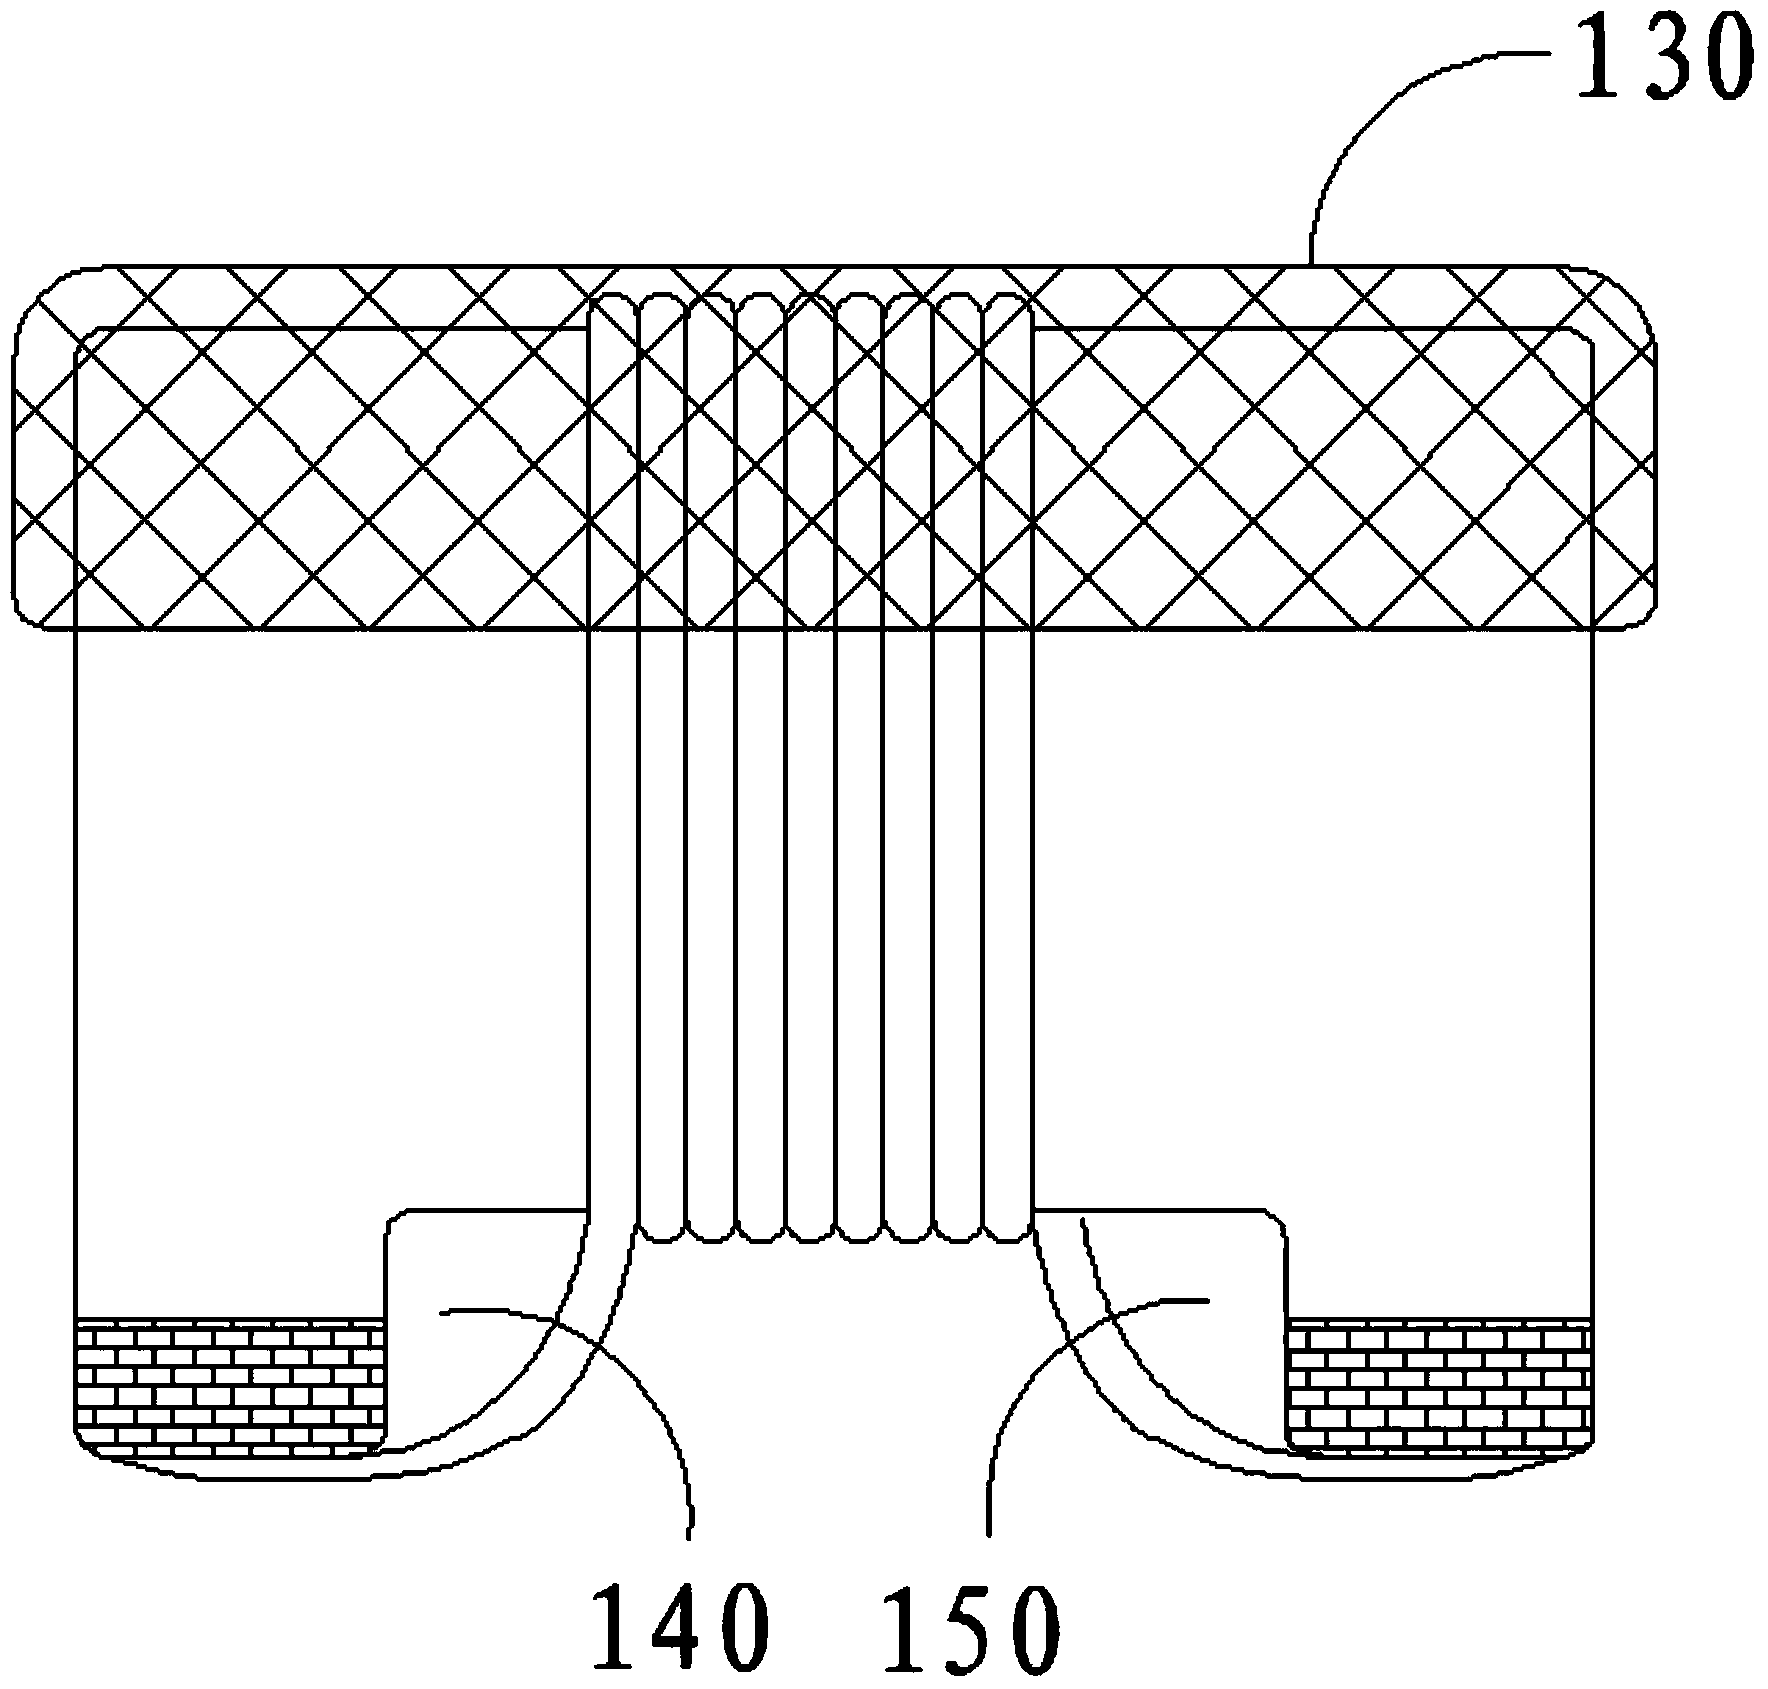 Encapsulation structure of wire winding type electronic device and chip inductor